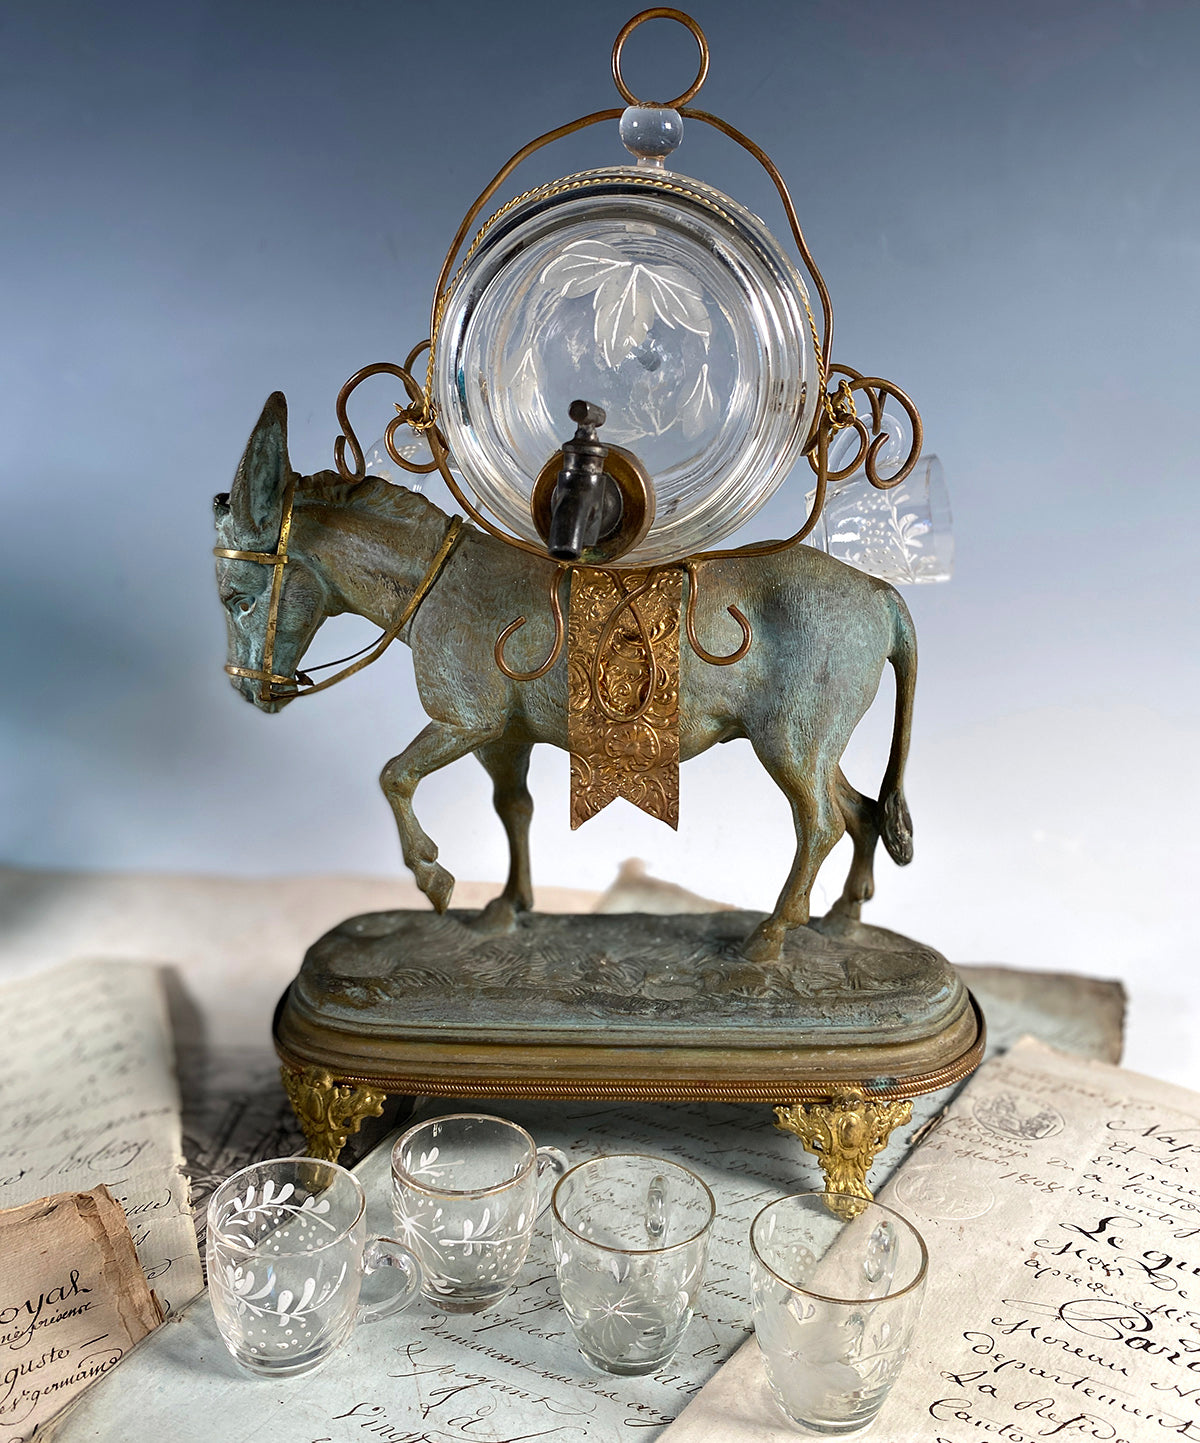 Antique French Napoleon III Liqueur Stand, Caddy or Tantalus, Barrel & Cups: Donkey or Mule Figural, Sculptor: E. DELABRIERRE